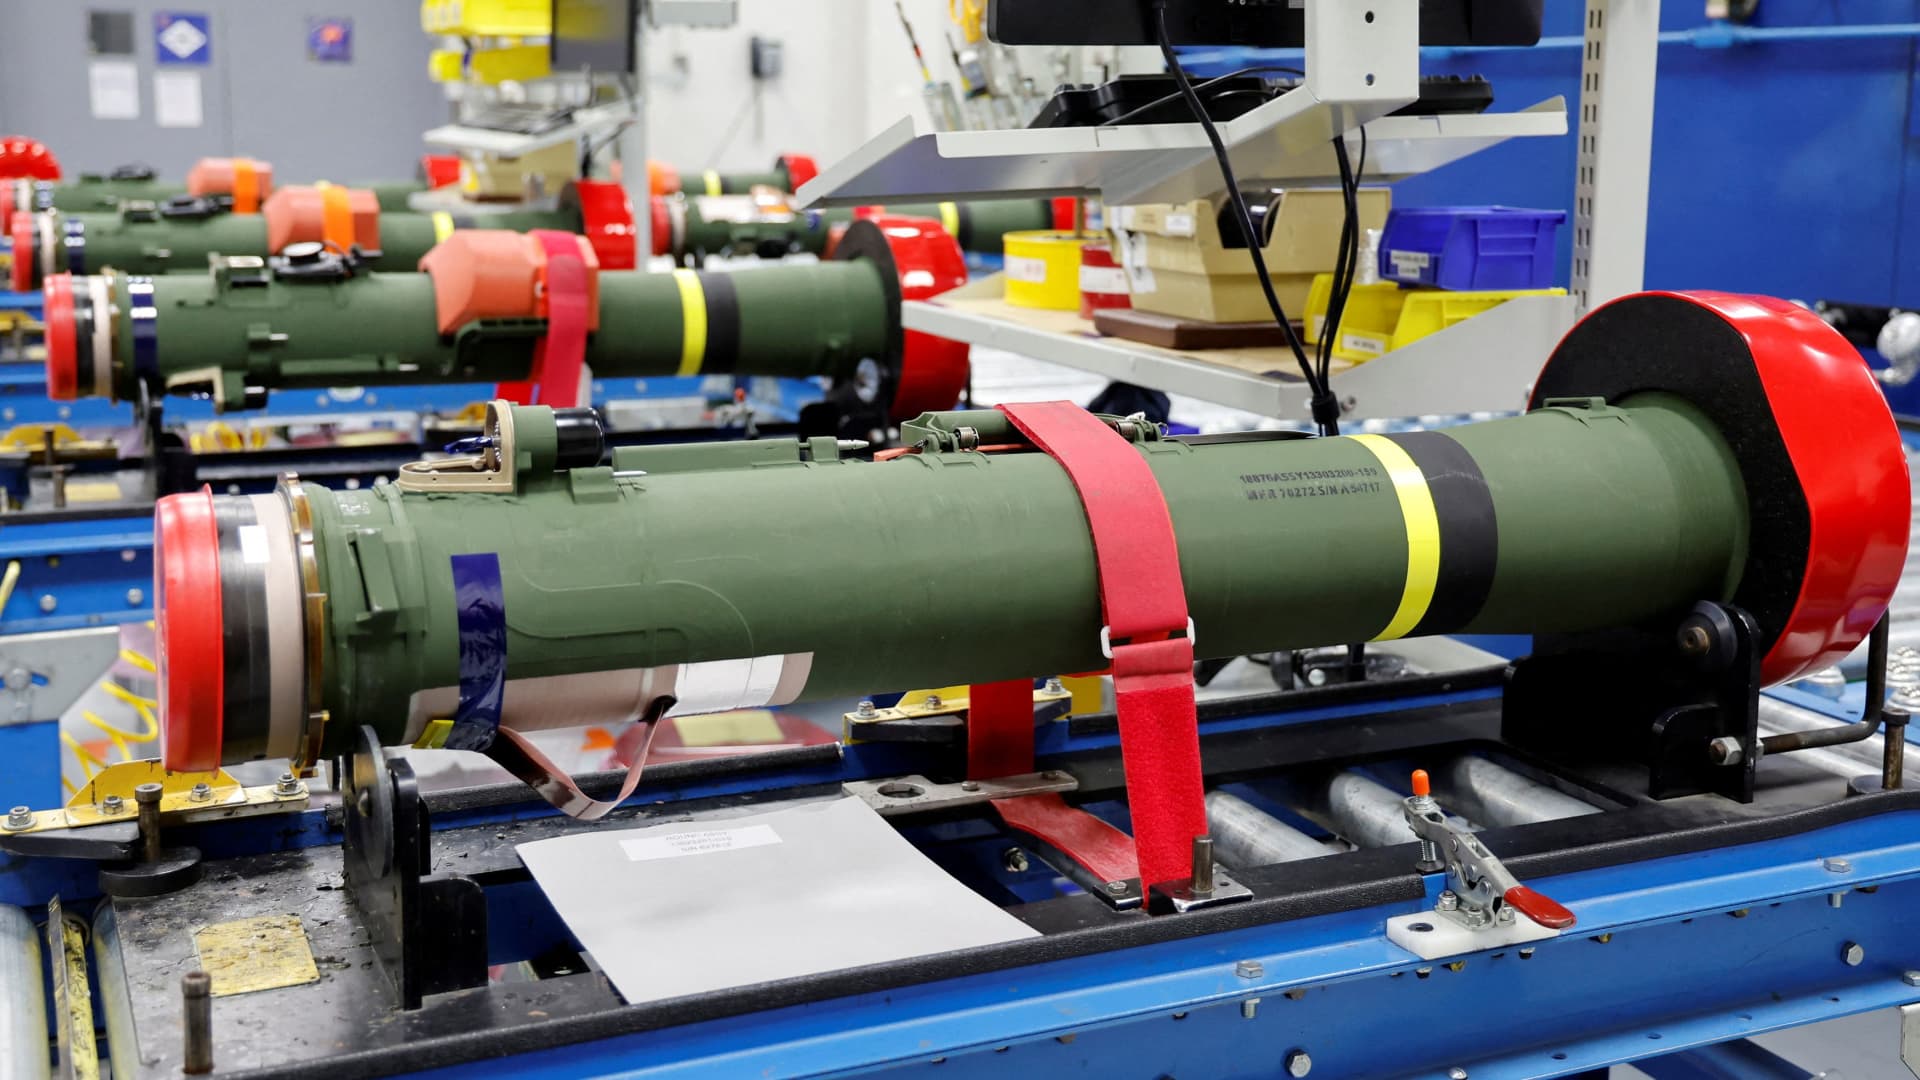 Javeline anti-tank missiles are displayed on the assembly line as U.S. President Joe Biden tours a Lockheed Martin weapons factory in Troy, Alabama, U.S. May 3, 2022. 